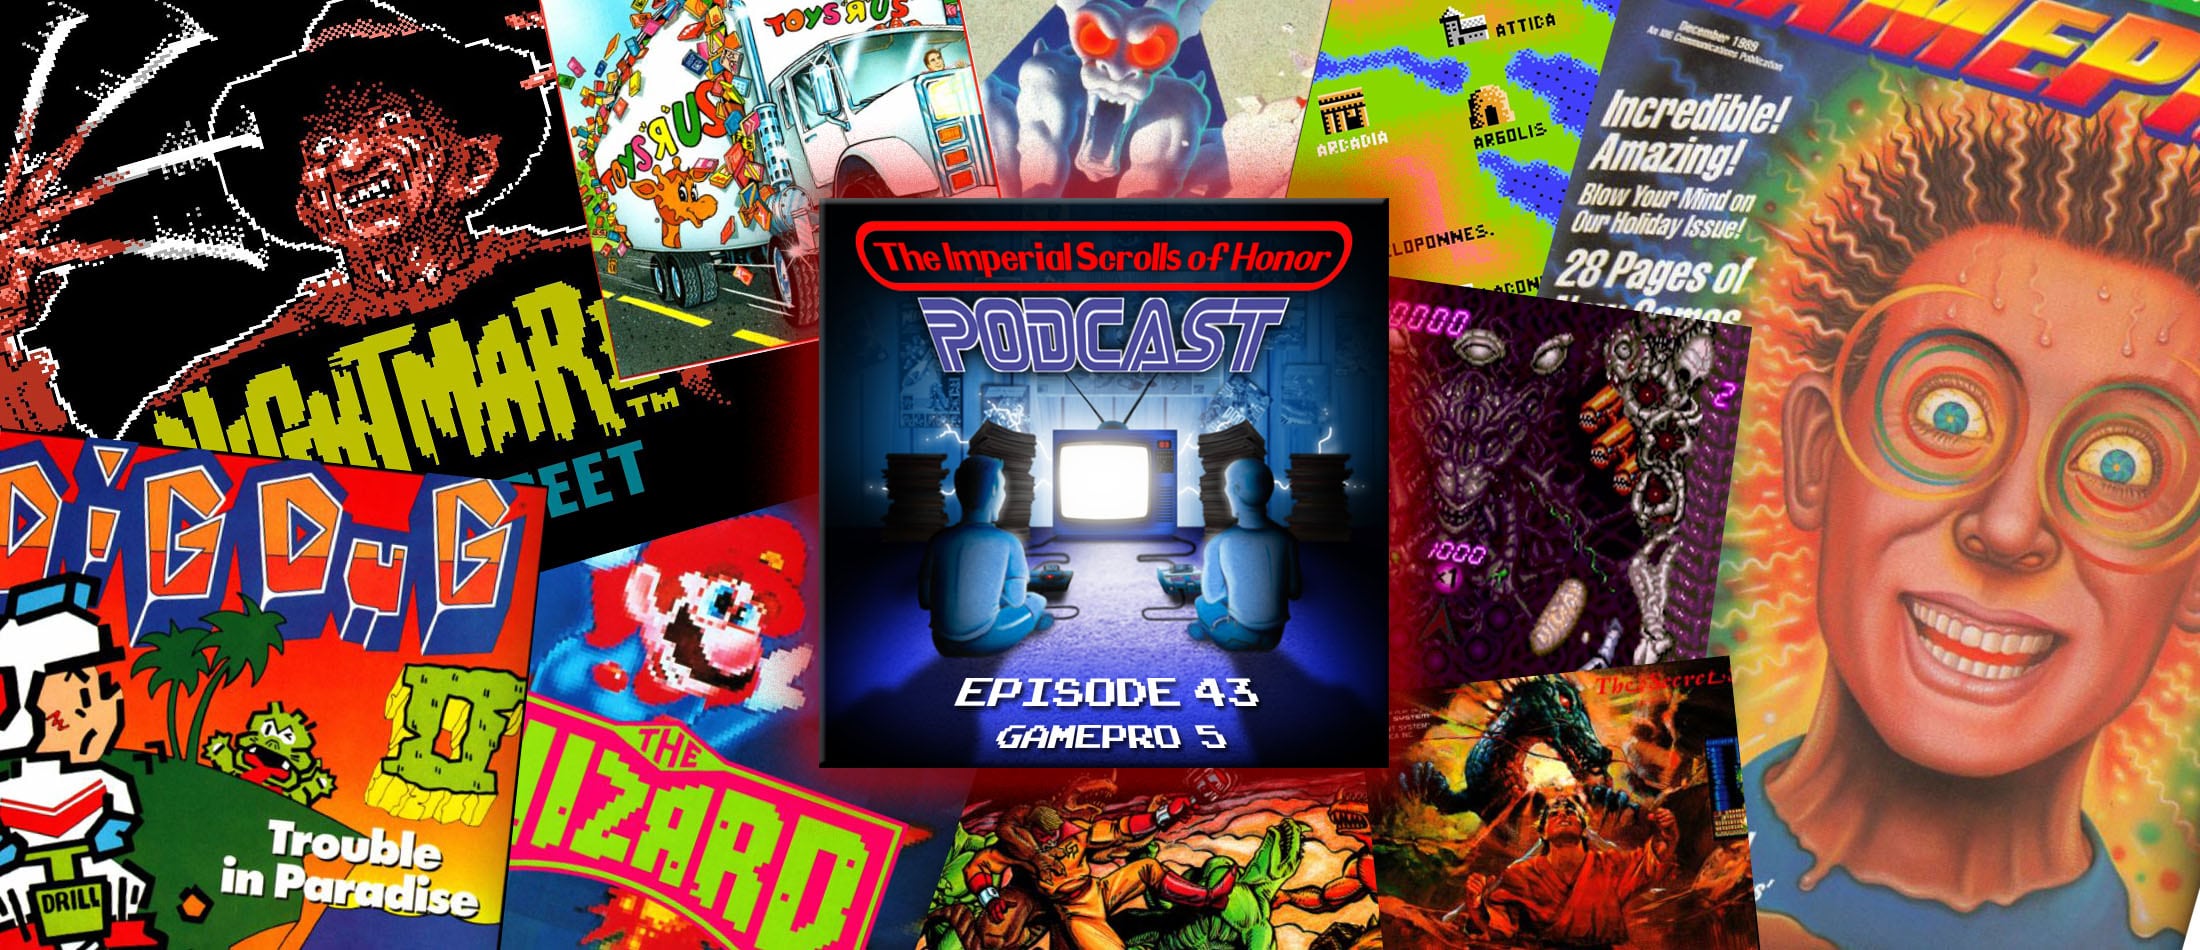 The Imperial Scrolls of Honor Podcast - Episode 43 - GamePro #5